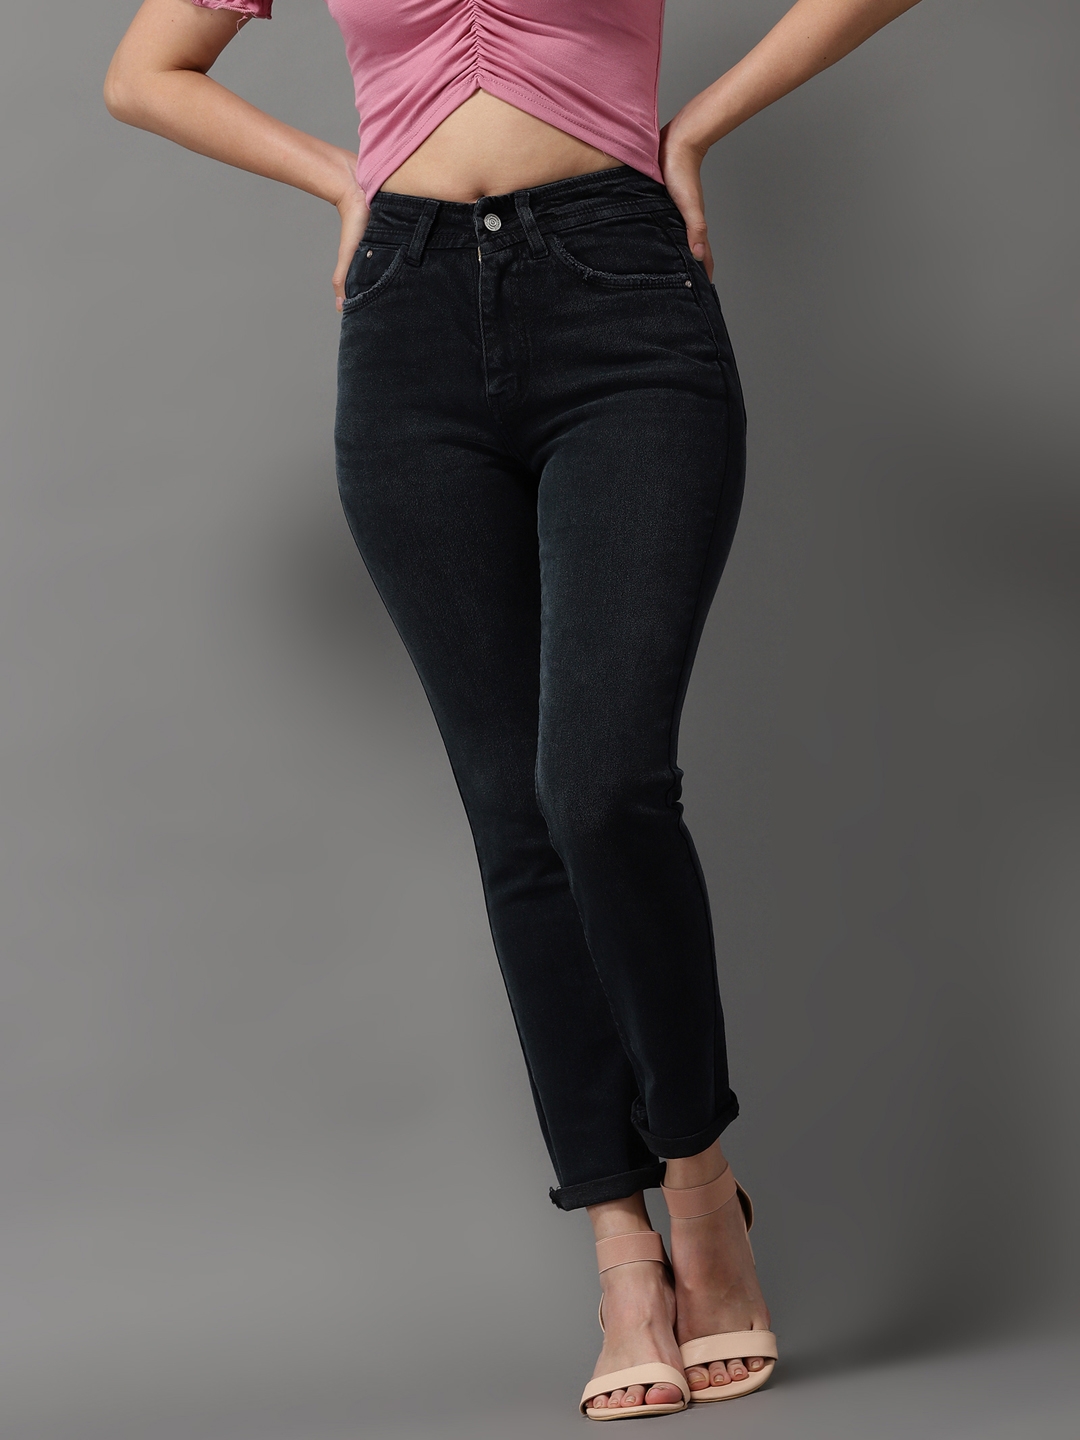 SHOWOFF Women's High-Rise Charcoal Clean Look Jeans